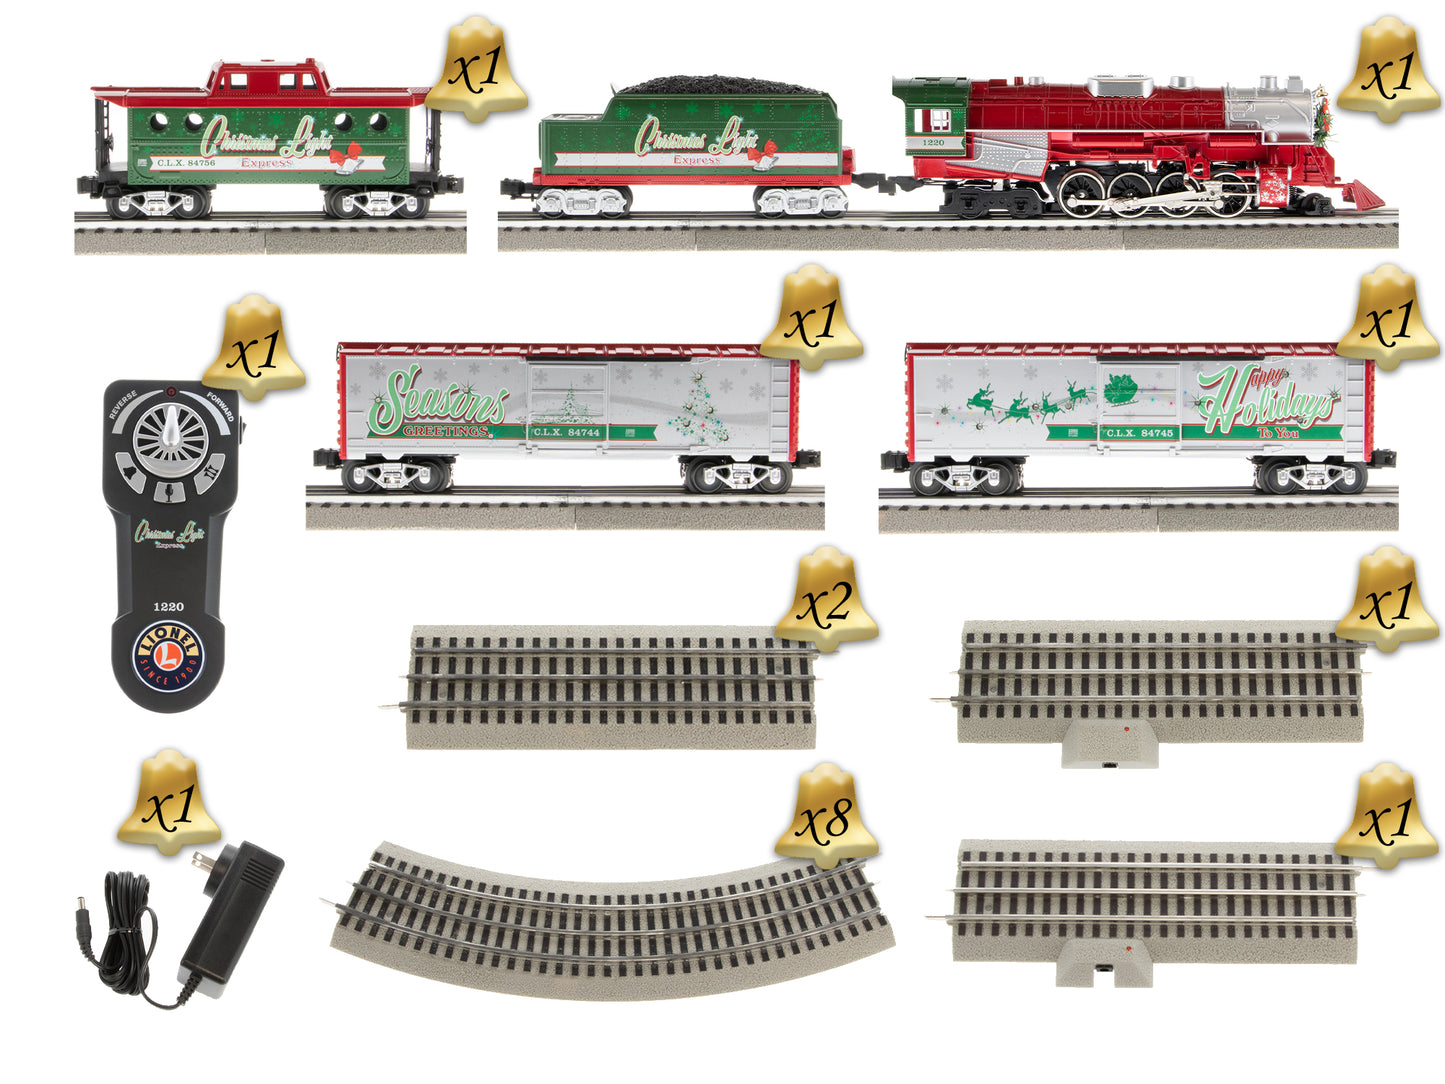 Lionel model train set Christmas Light Express LionChief. All the pieces included. O scale